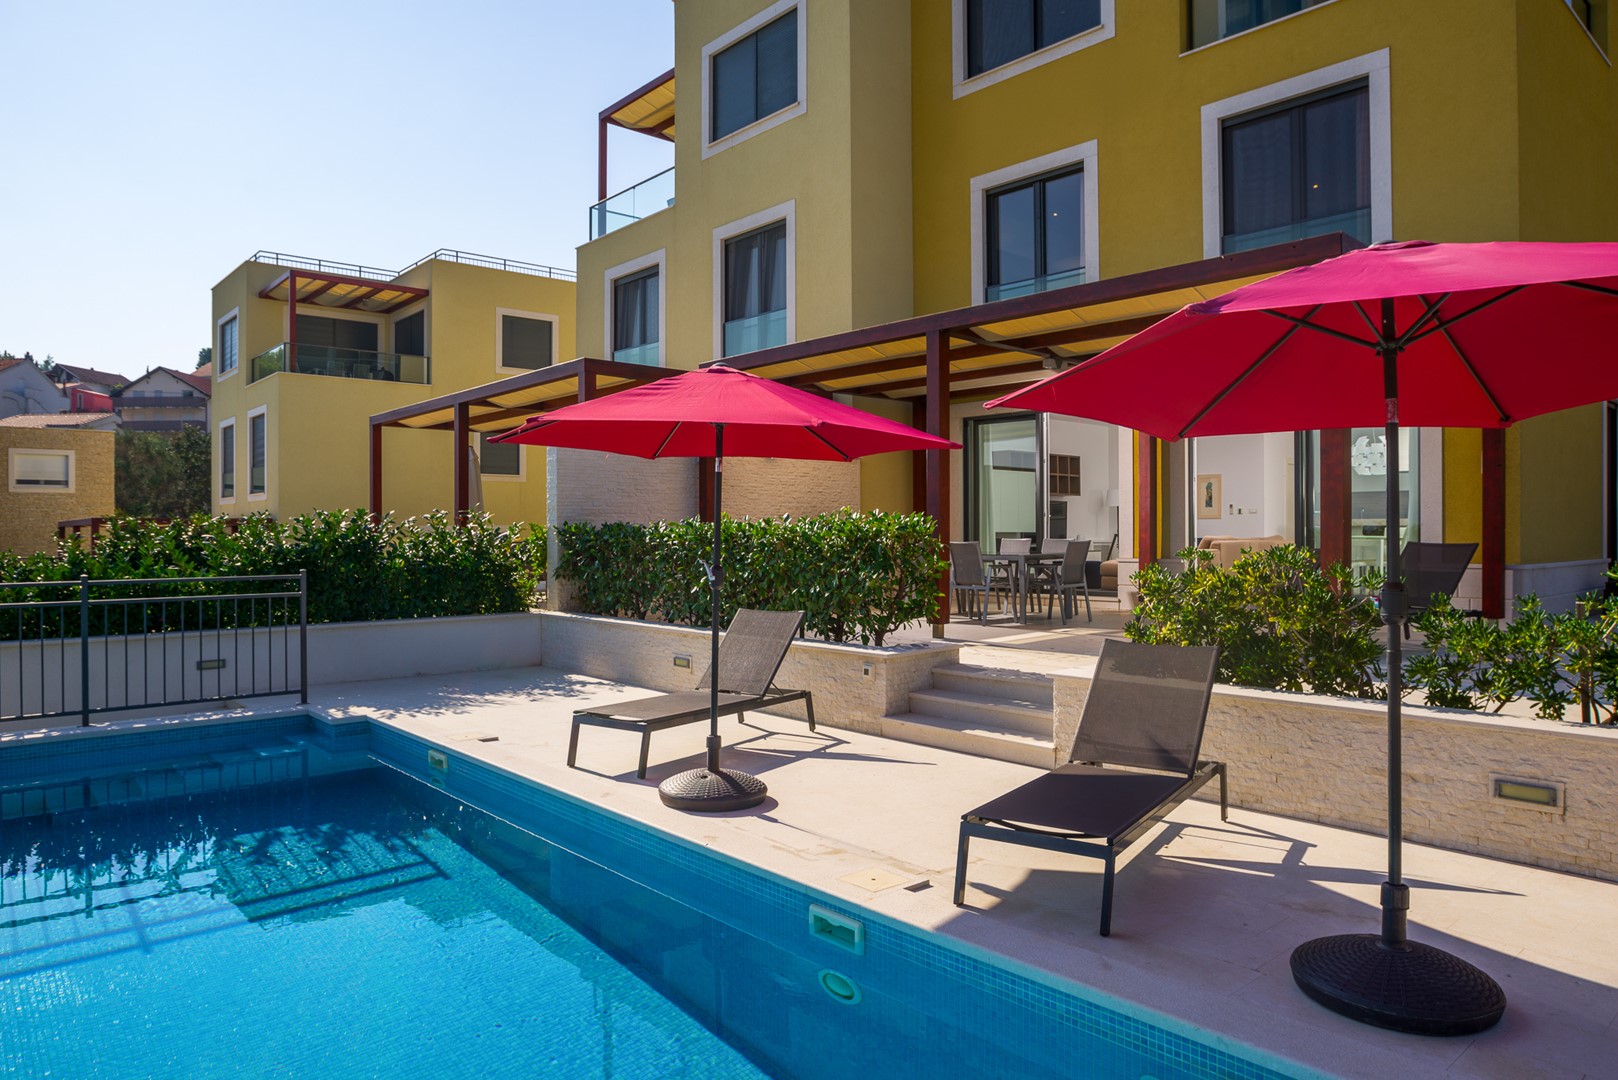 Deck chairs and parasols by the pool of a Croatia luxury vacation villa at the beach on Ciovo